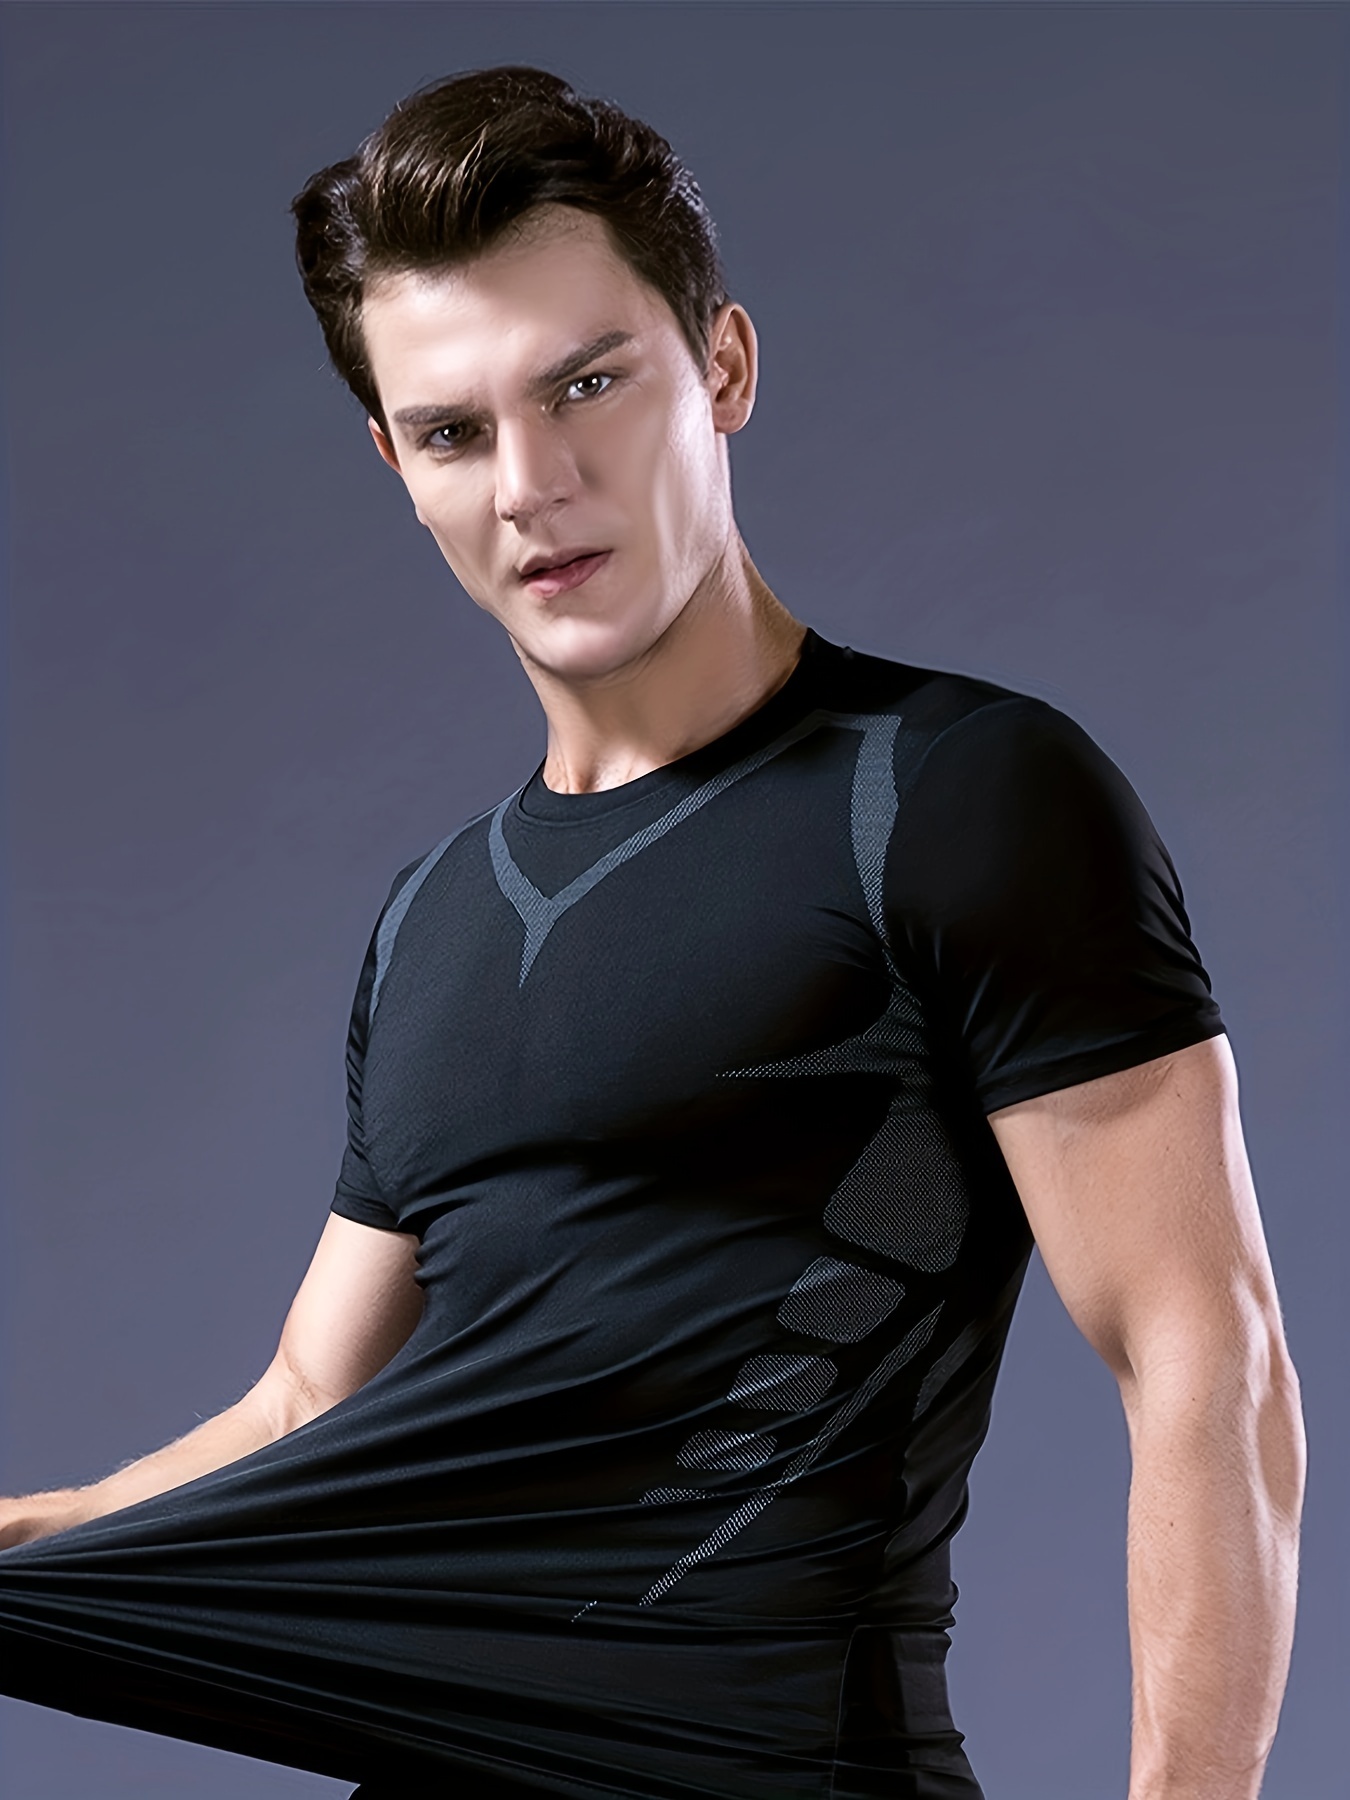 EQWLJWE Men's Compression Shirt Cool Dry Athletic Baselayer Workout Short  Sleeve Muscle Shirts